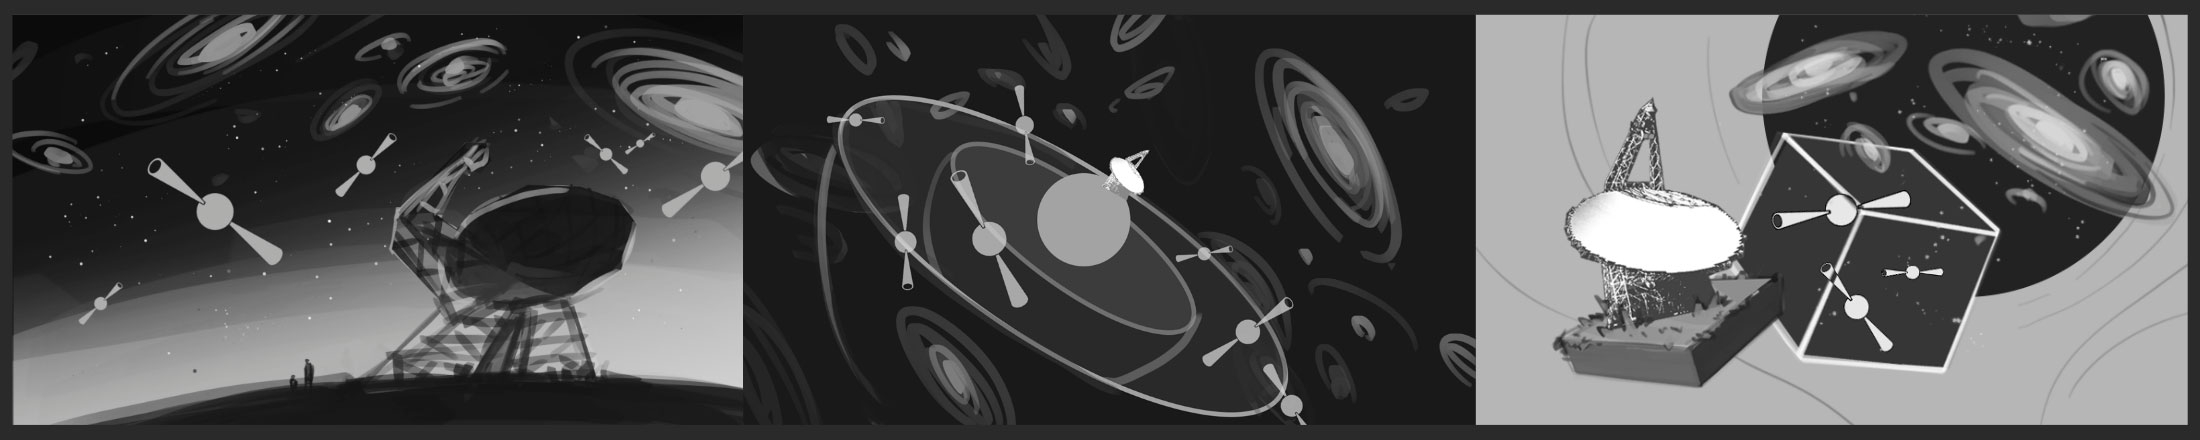 Sketches of space scenes with pulsars and galaxies